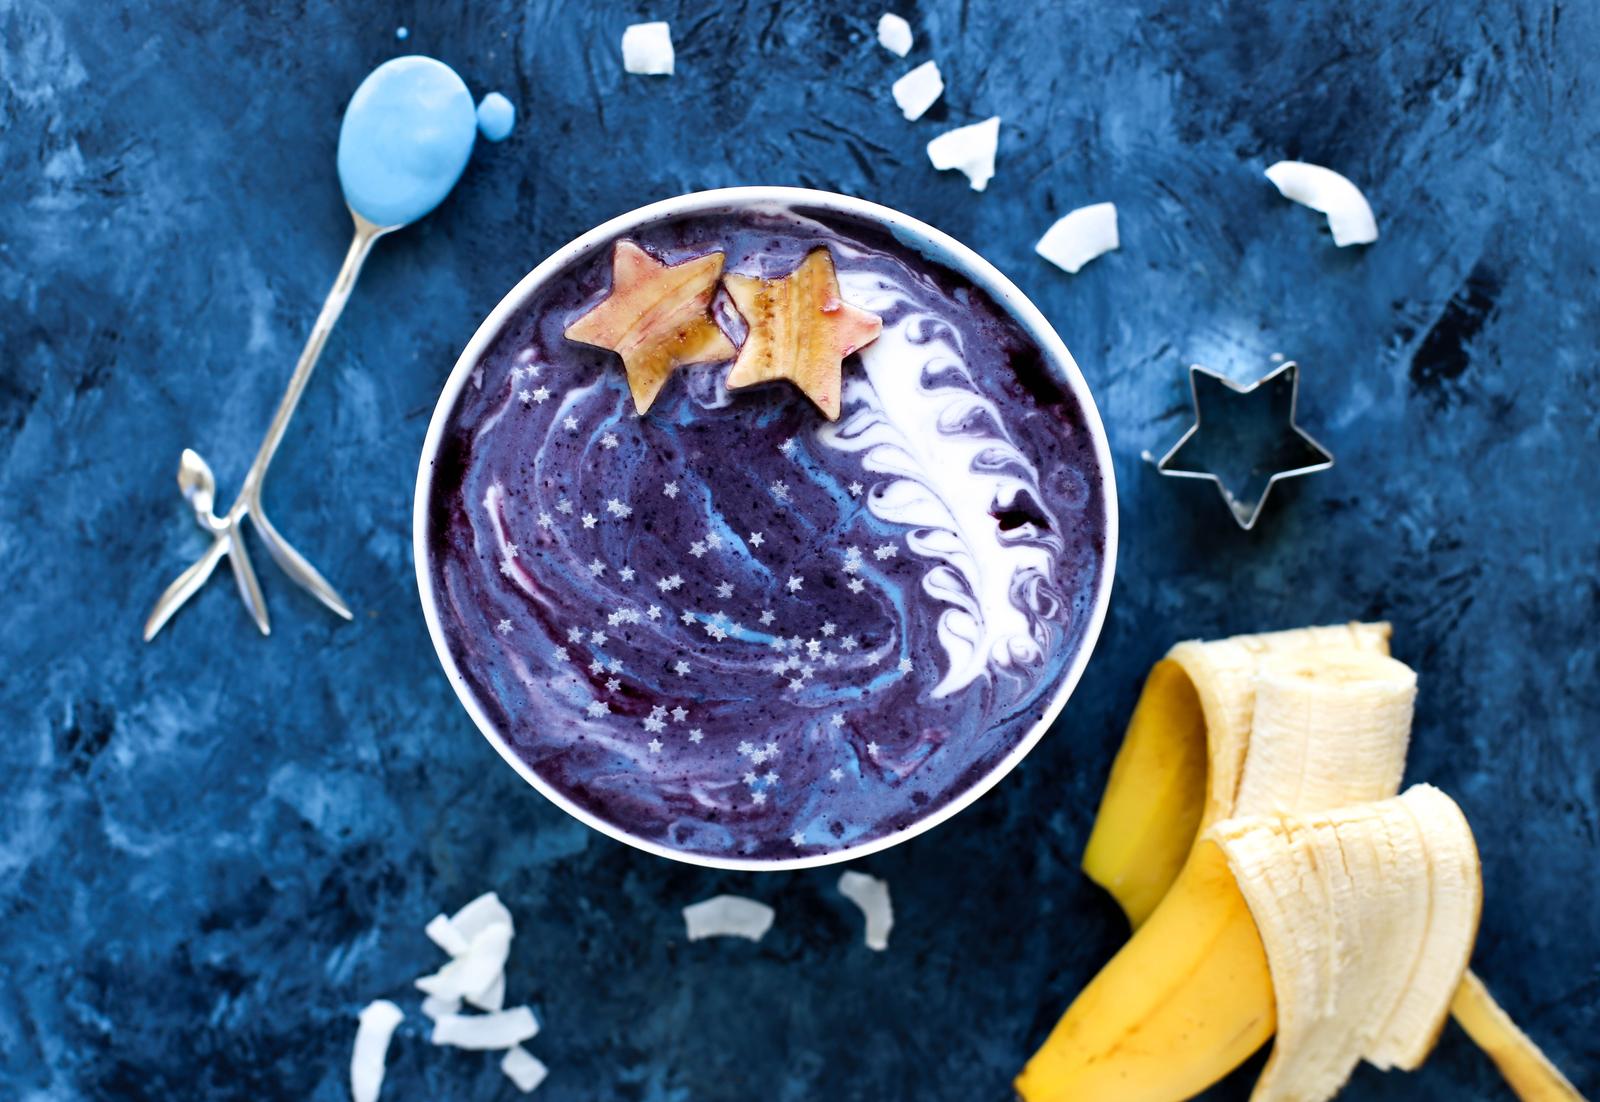 It’ll Be Hard, But Choose Between These Foods and We’ll Know What Mood You’re in Galaxy smoothie bowl